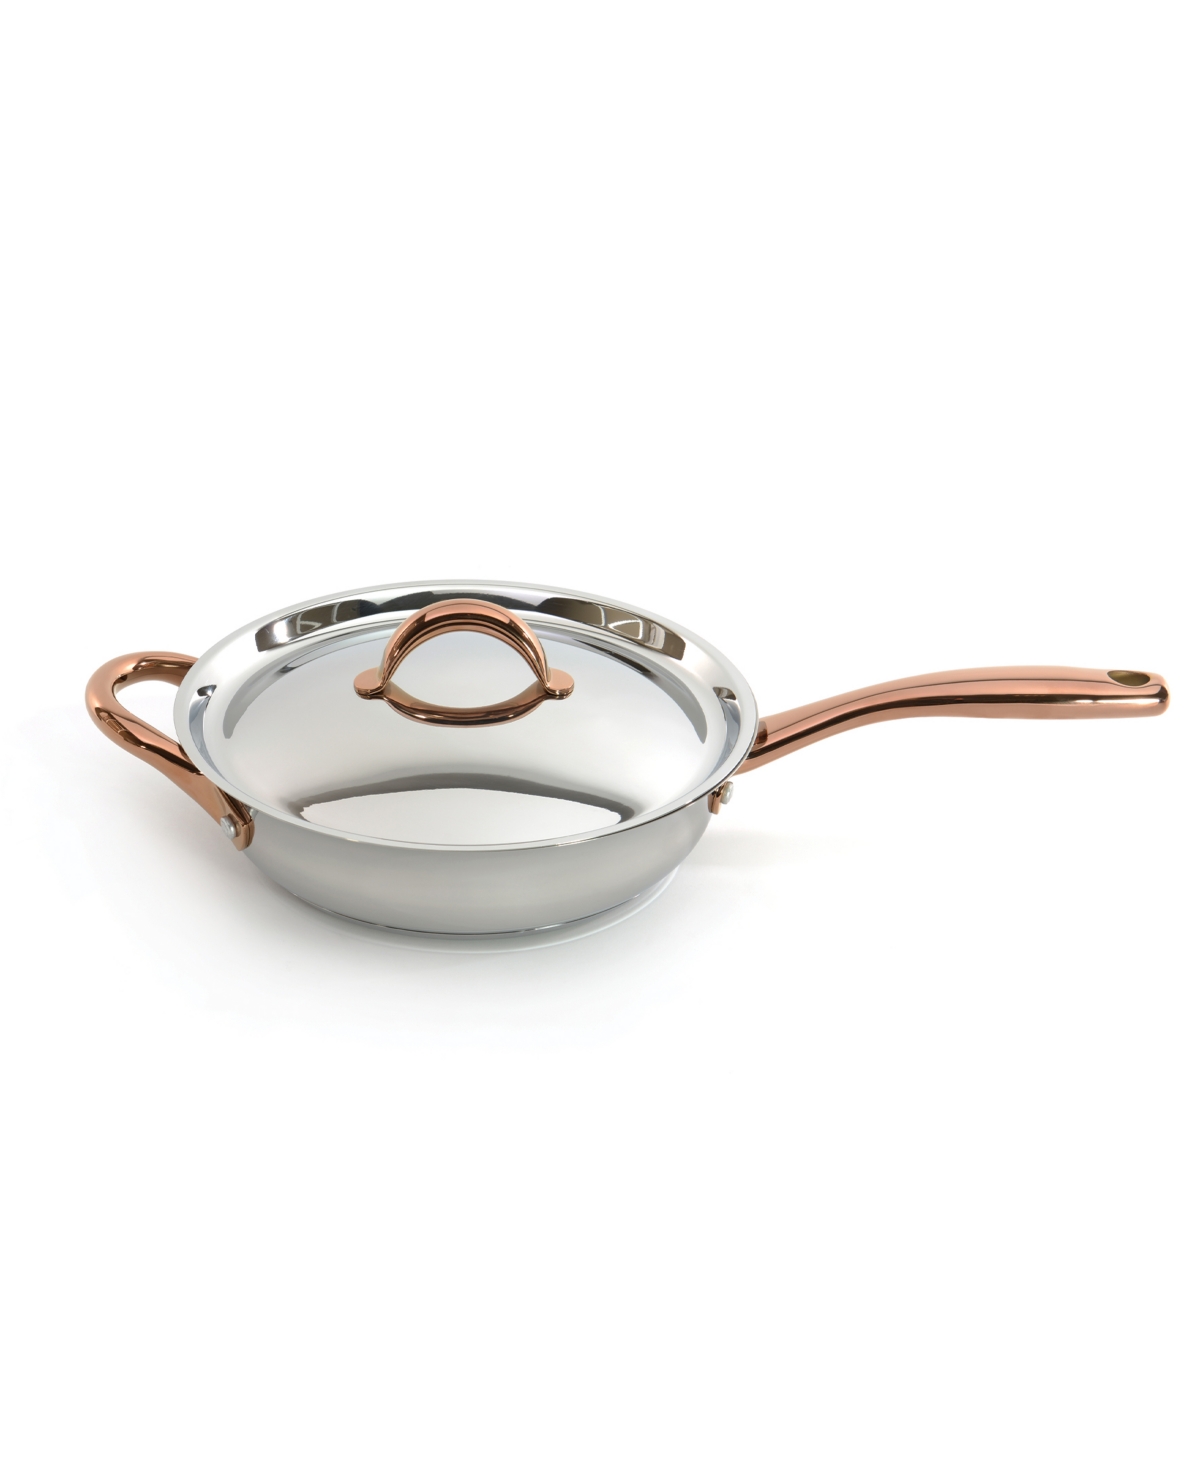 Ouro 9.5 Deep Skillet with Lid and 2 Side Handles